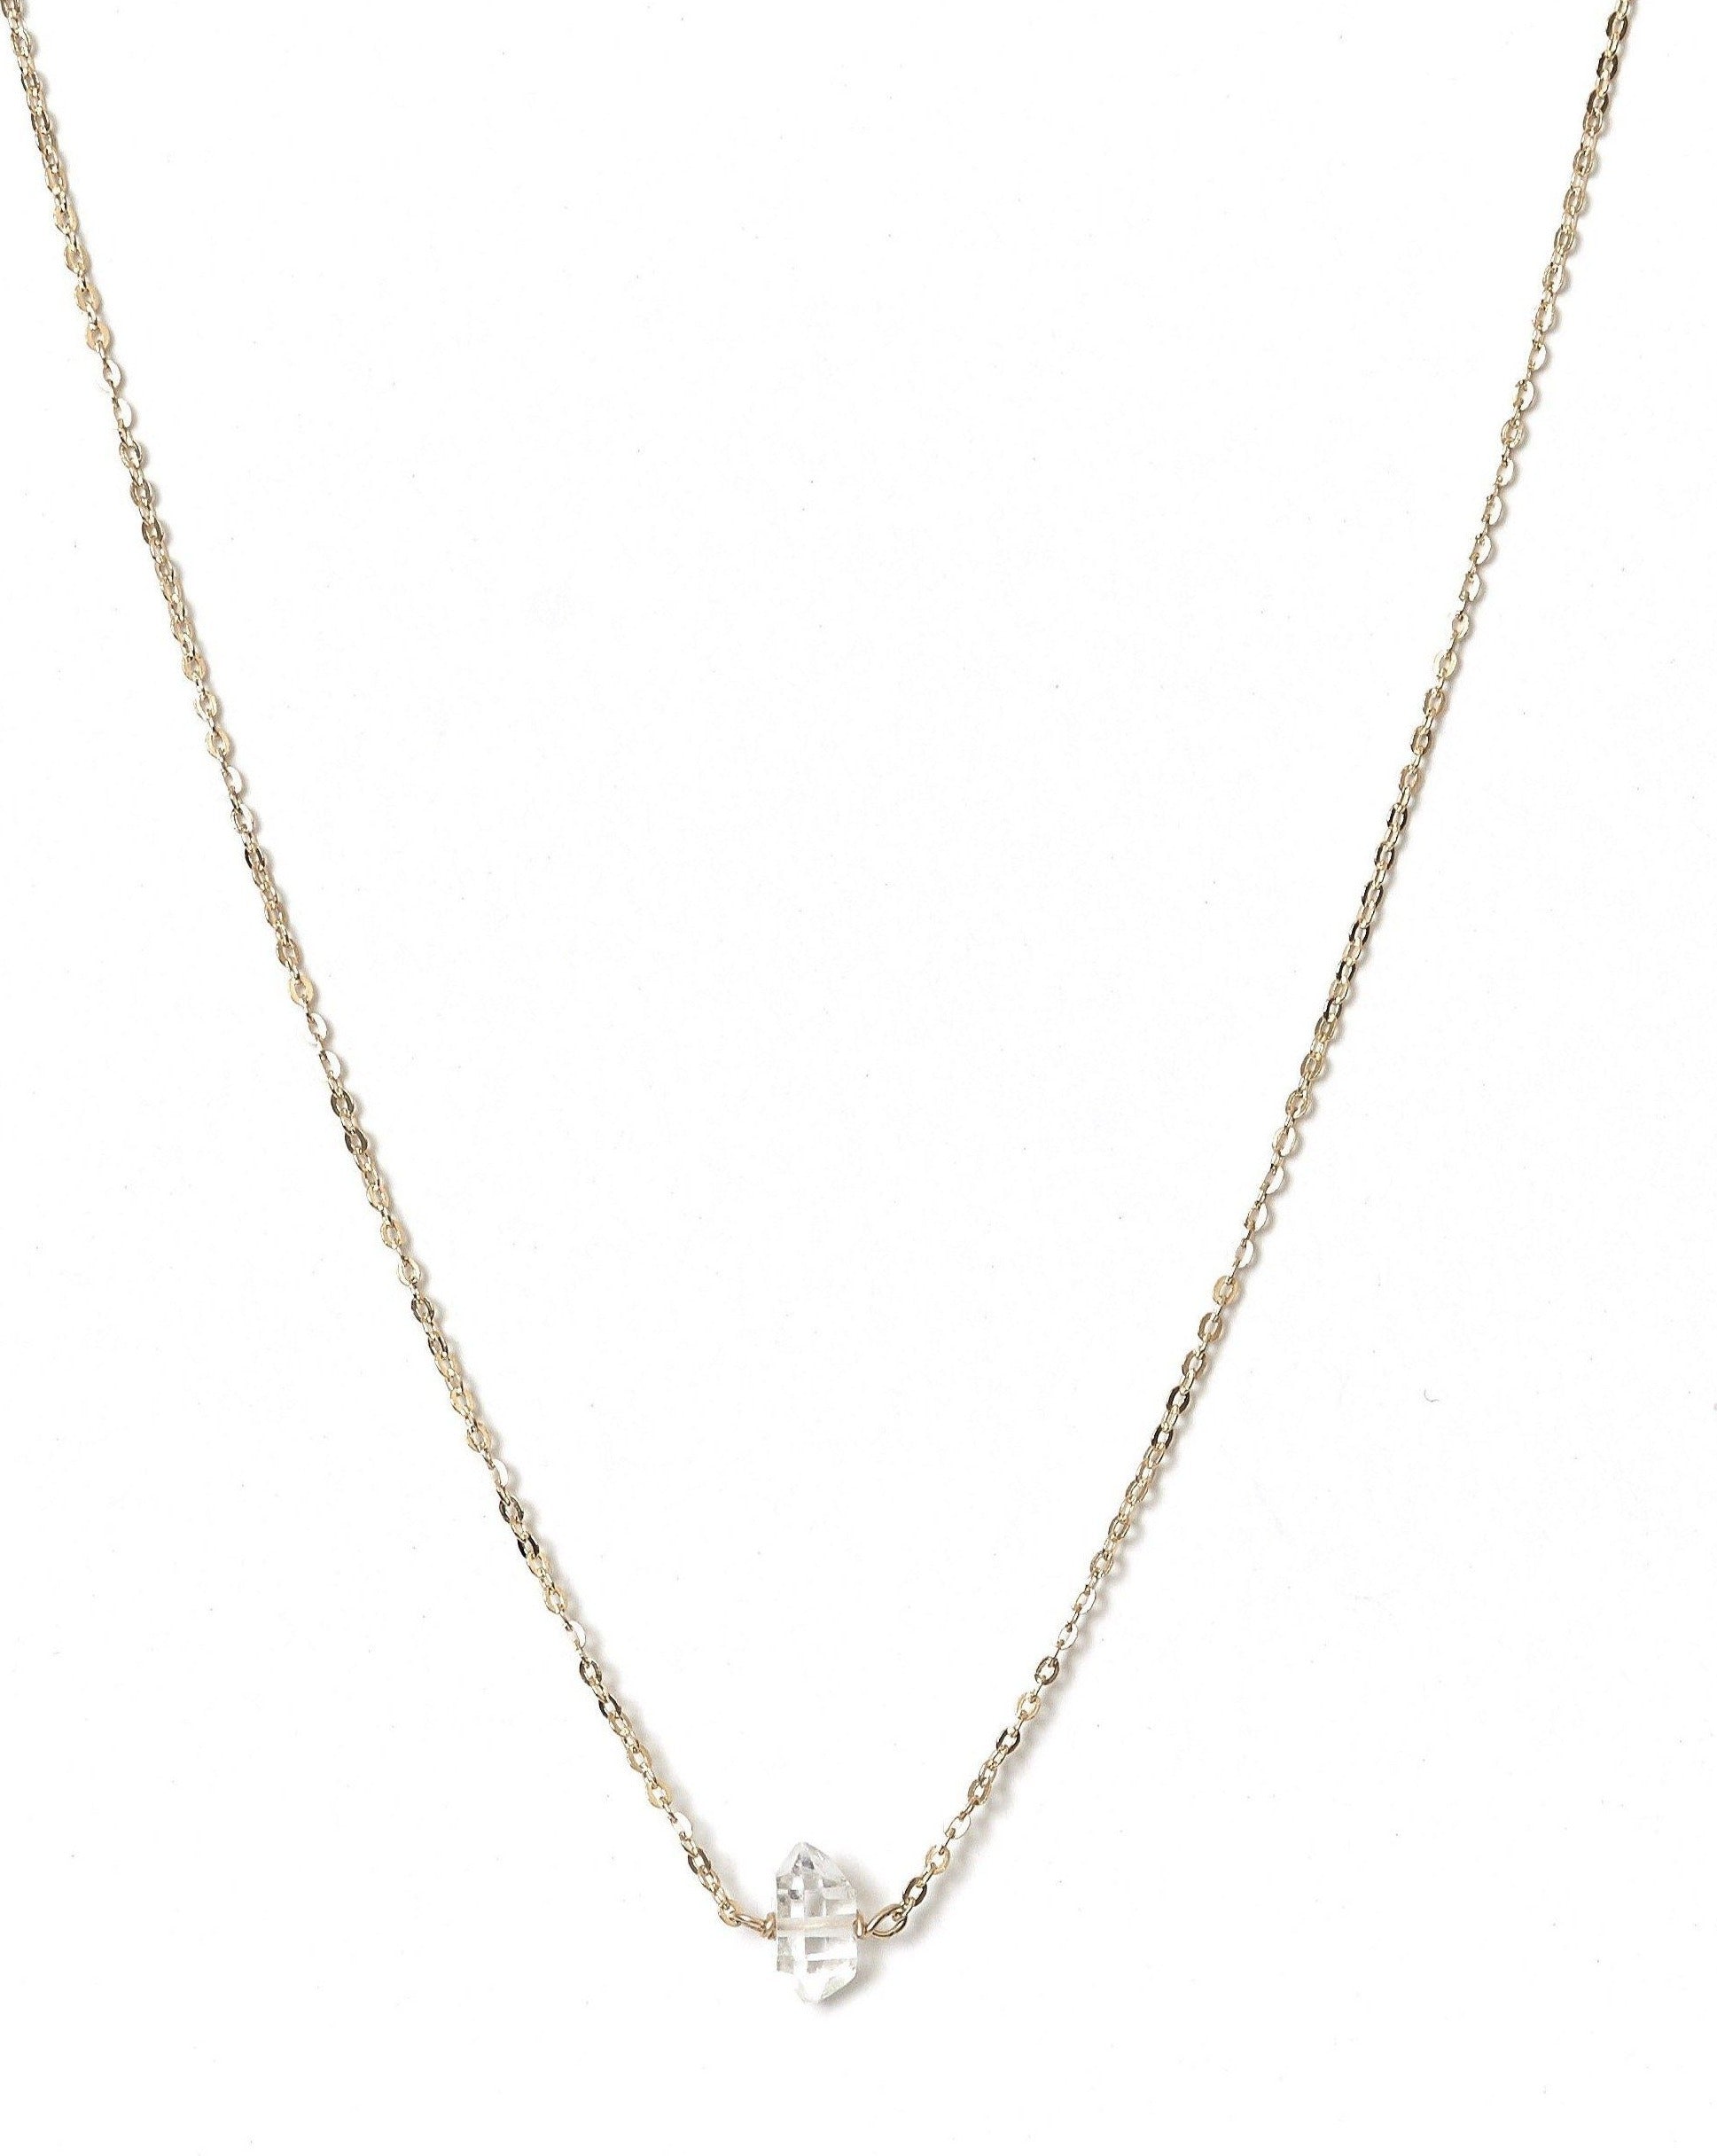 Dia Necklace by KOZAKH. A 16 to 18 inch adjustable length necklace in 14K Gold Filled, featuring a Herkimer Diamond.